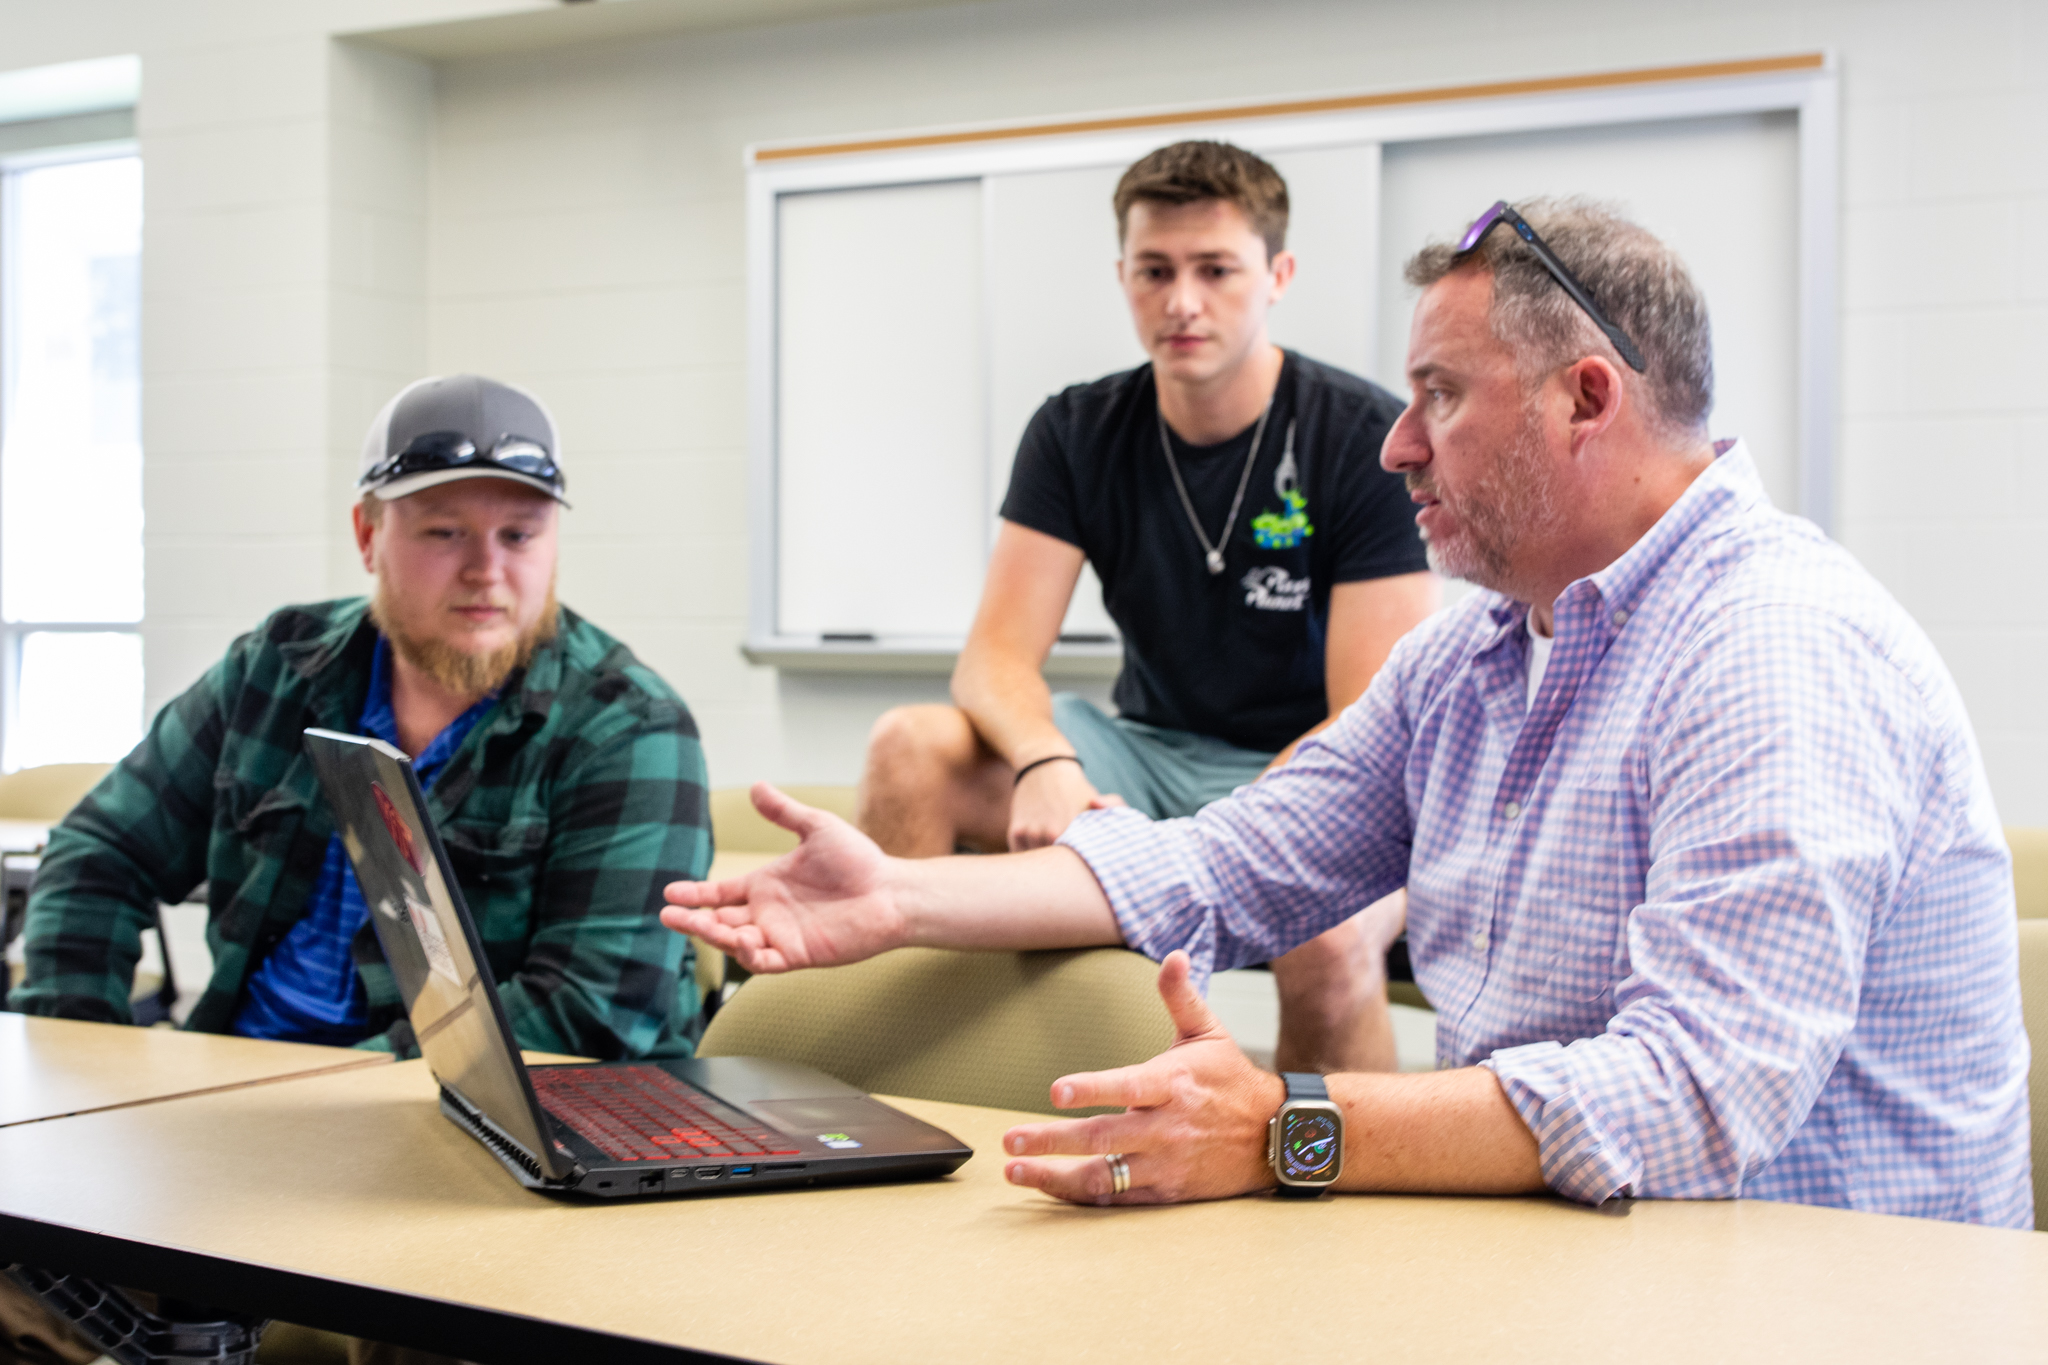 A professor talks with students in a classroom while gesturing to an open laptop on the table.